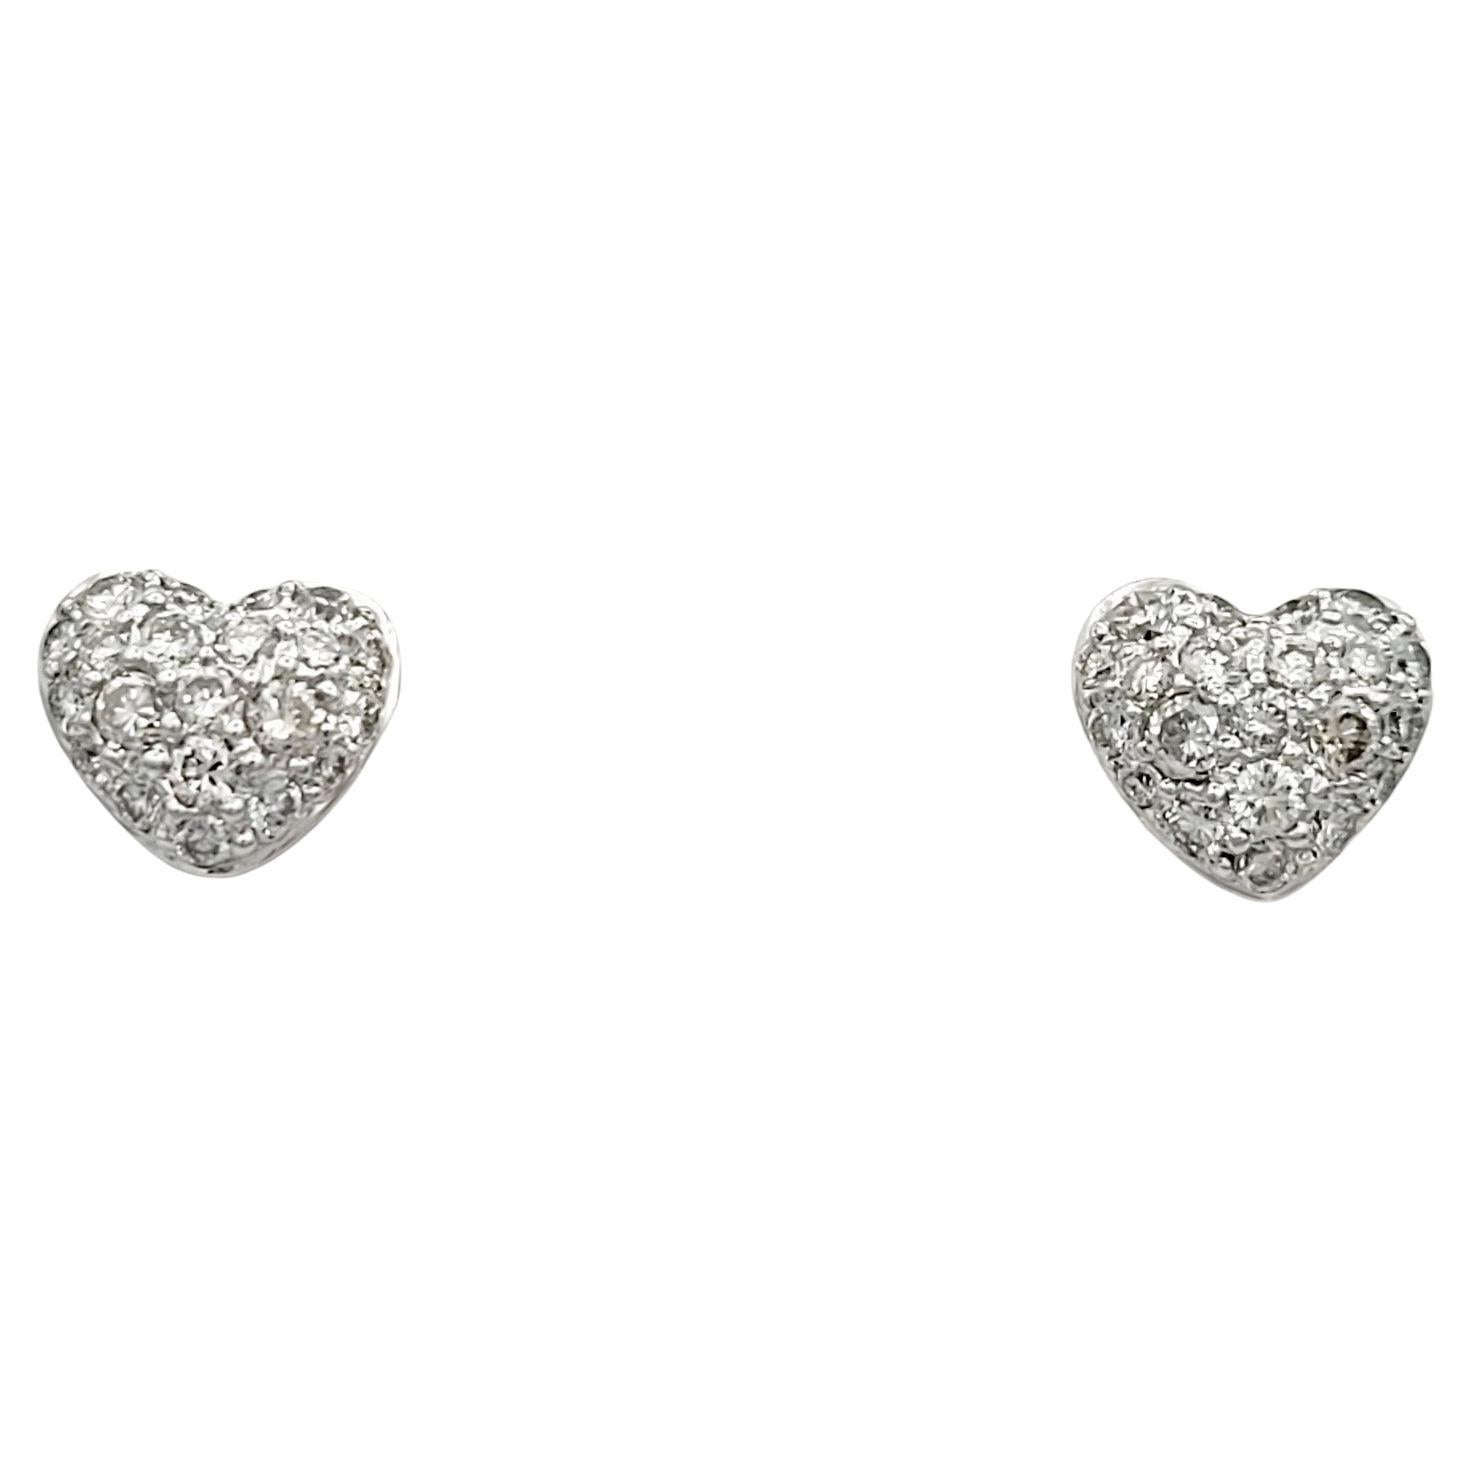 These pavé diamond heart stud earrings, set in exquisite 18 karat white gold, are a symbol of timeless romance and elegance. Each earring features a delicate heart shape adorned with pavé-set diamonds, creating a dazzling and brilliant surface that